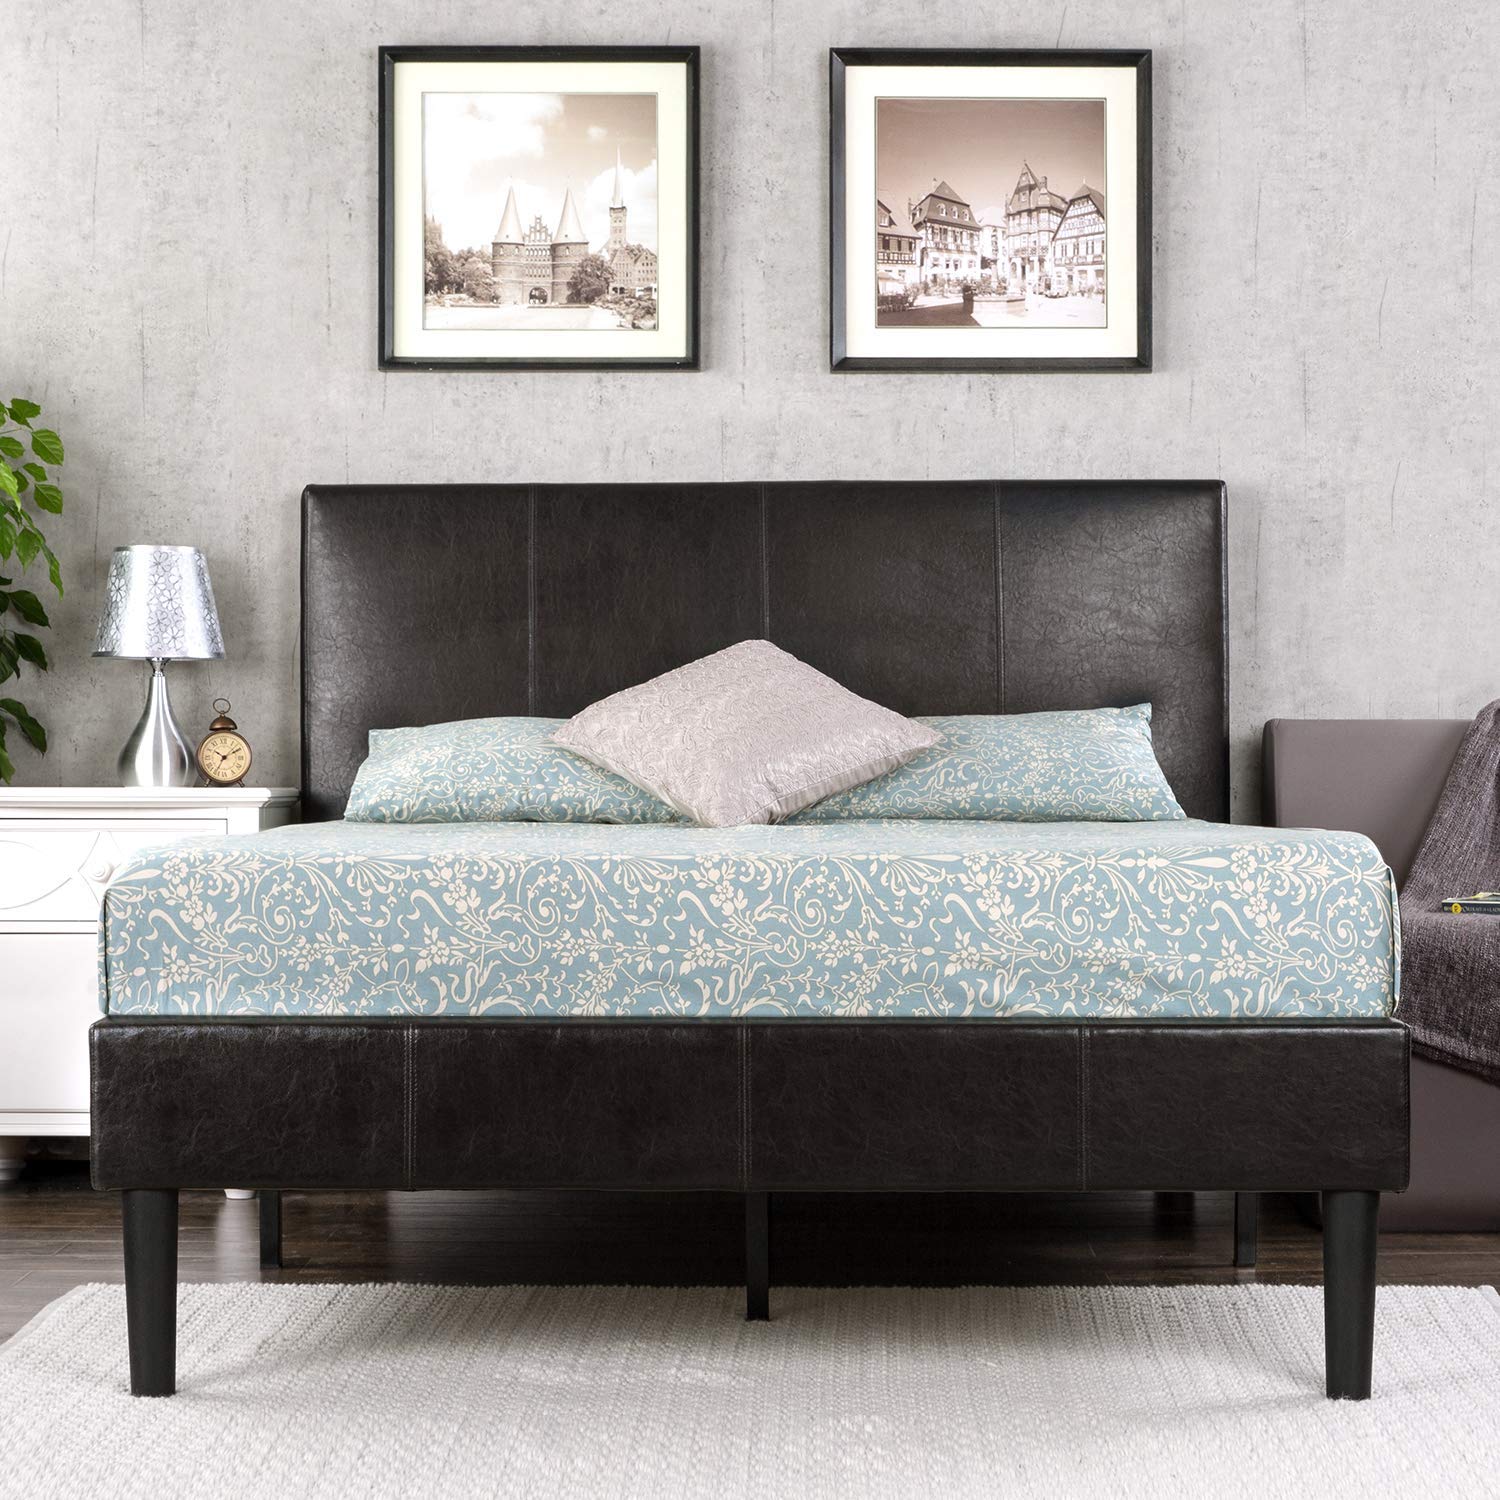 Zinus Gerard Faux Leather Upholstered Platform Bed Frame Mattress Foundation King size Espresso color $172.1 w Free Shipping